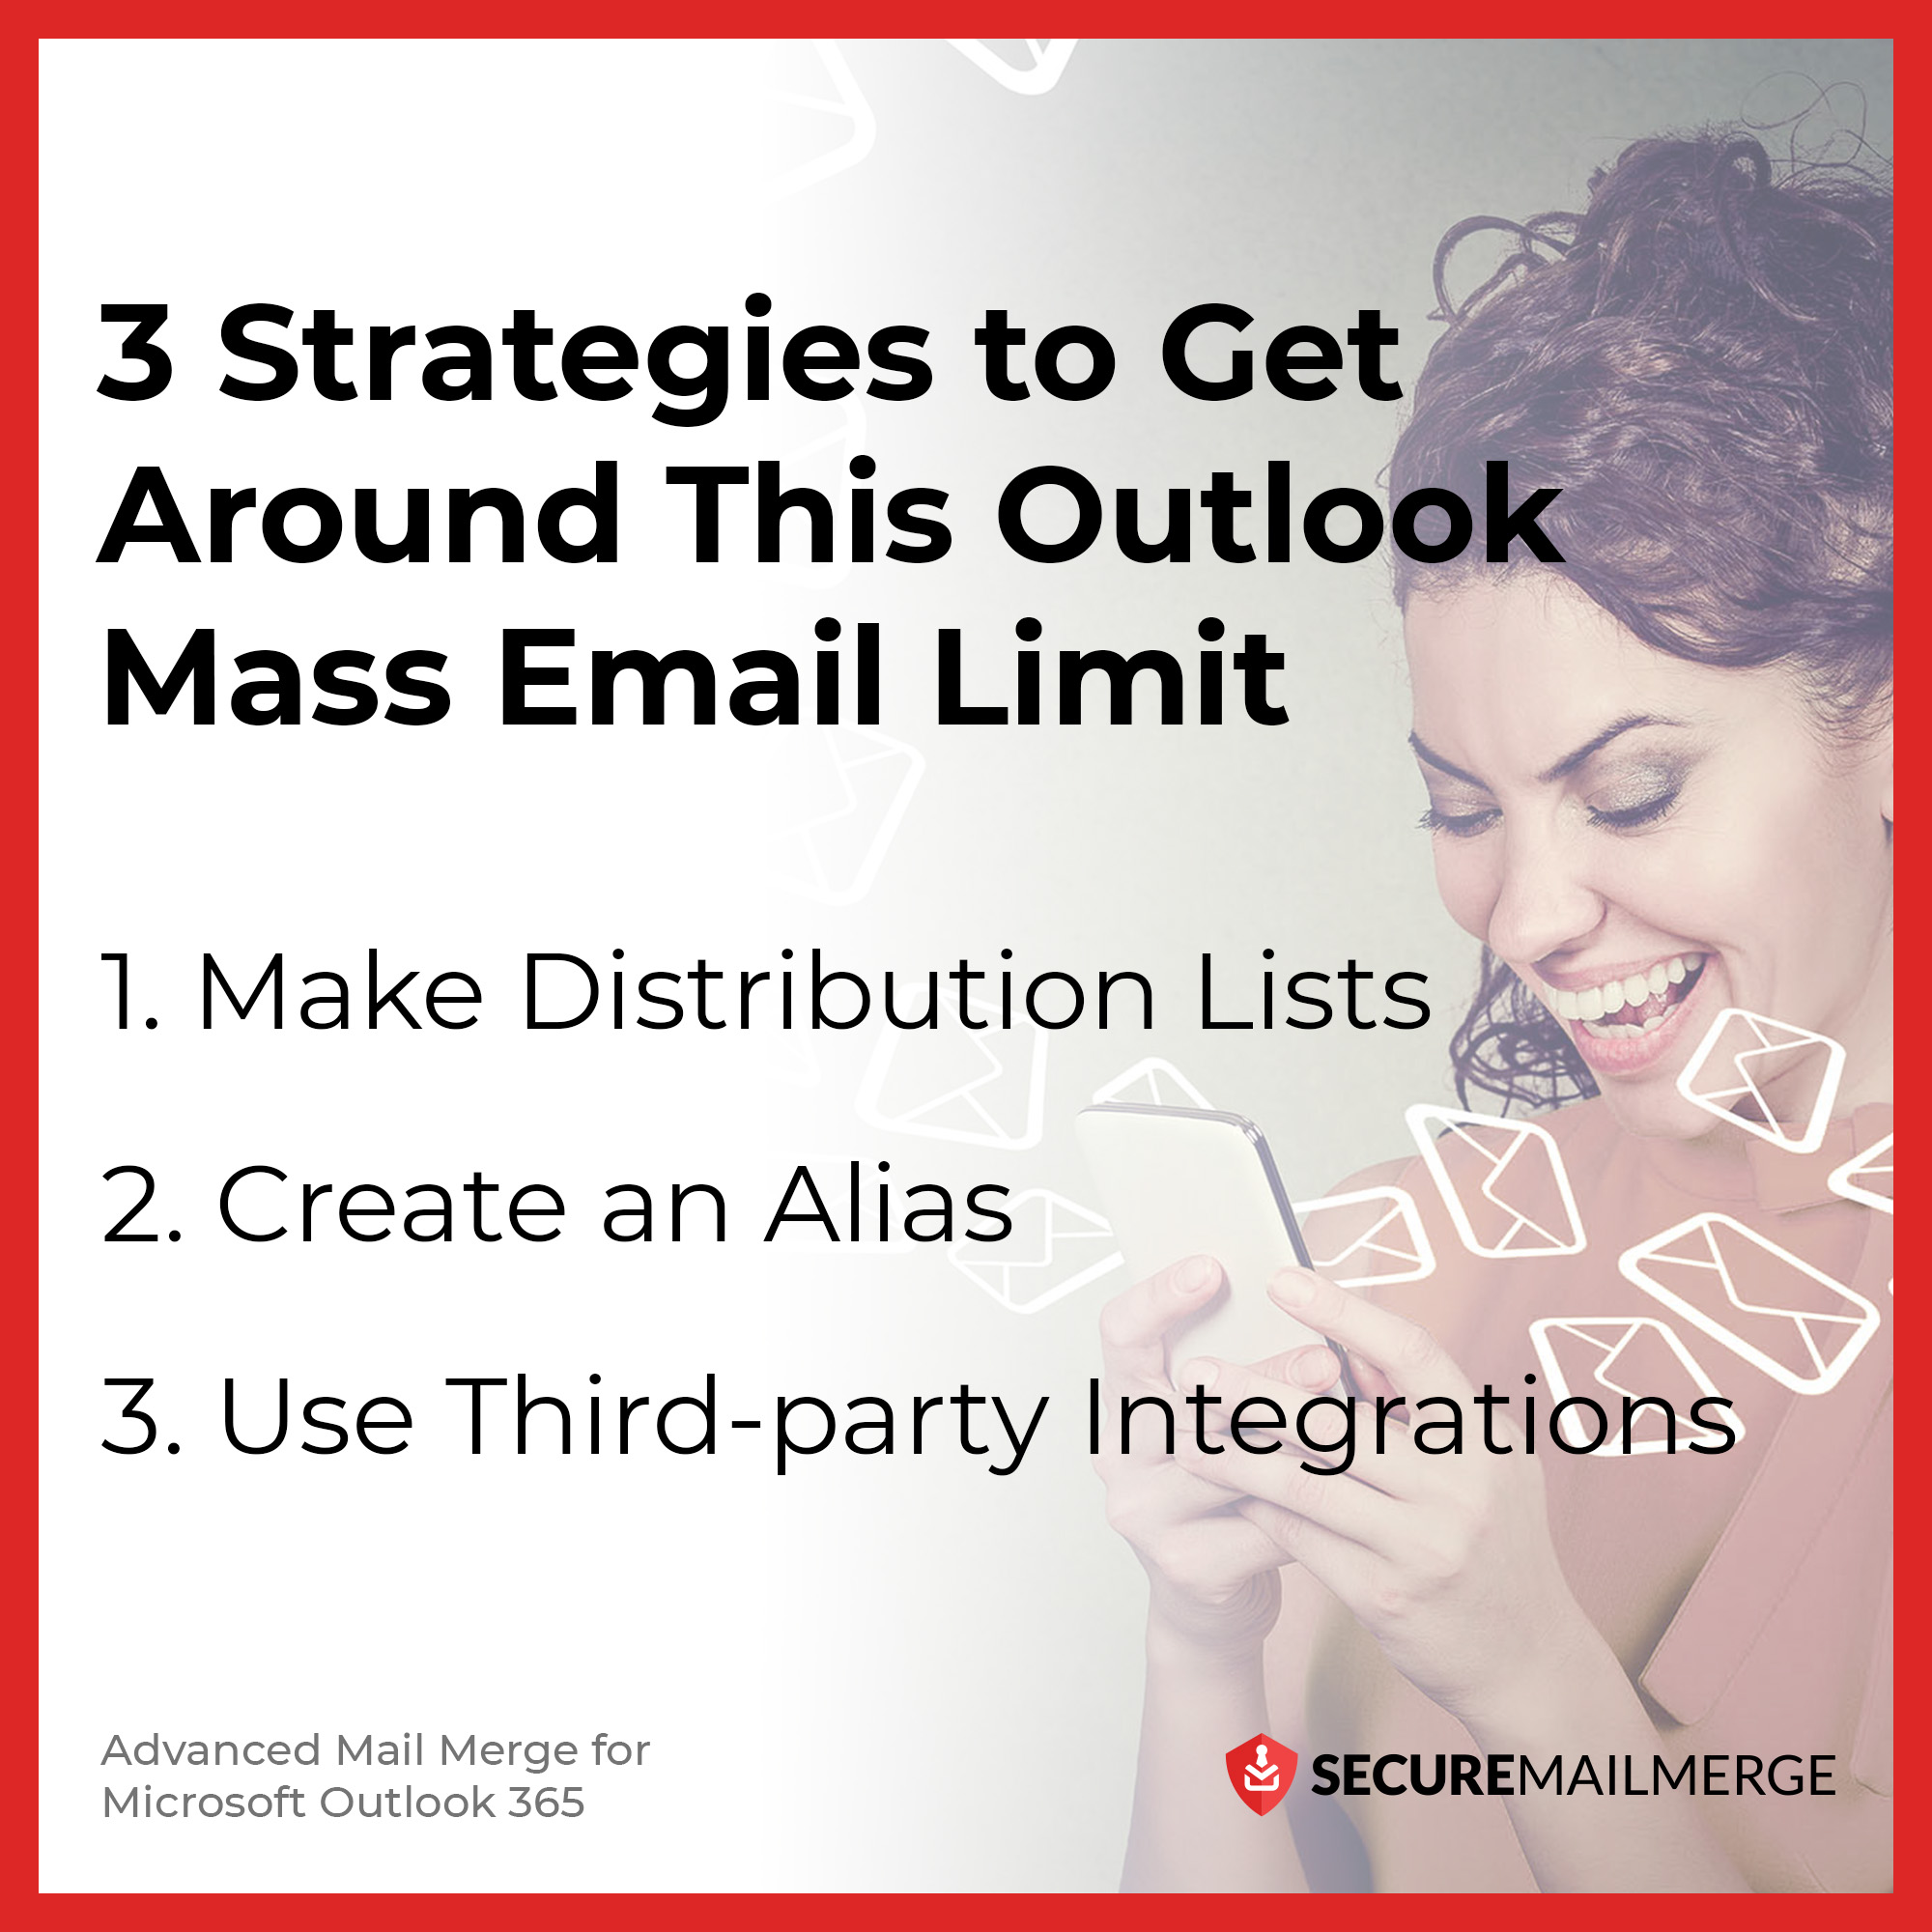 3 Strategies to Get Around This Outlook Mass Email Limit